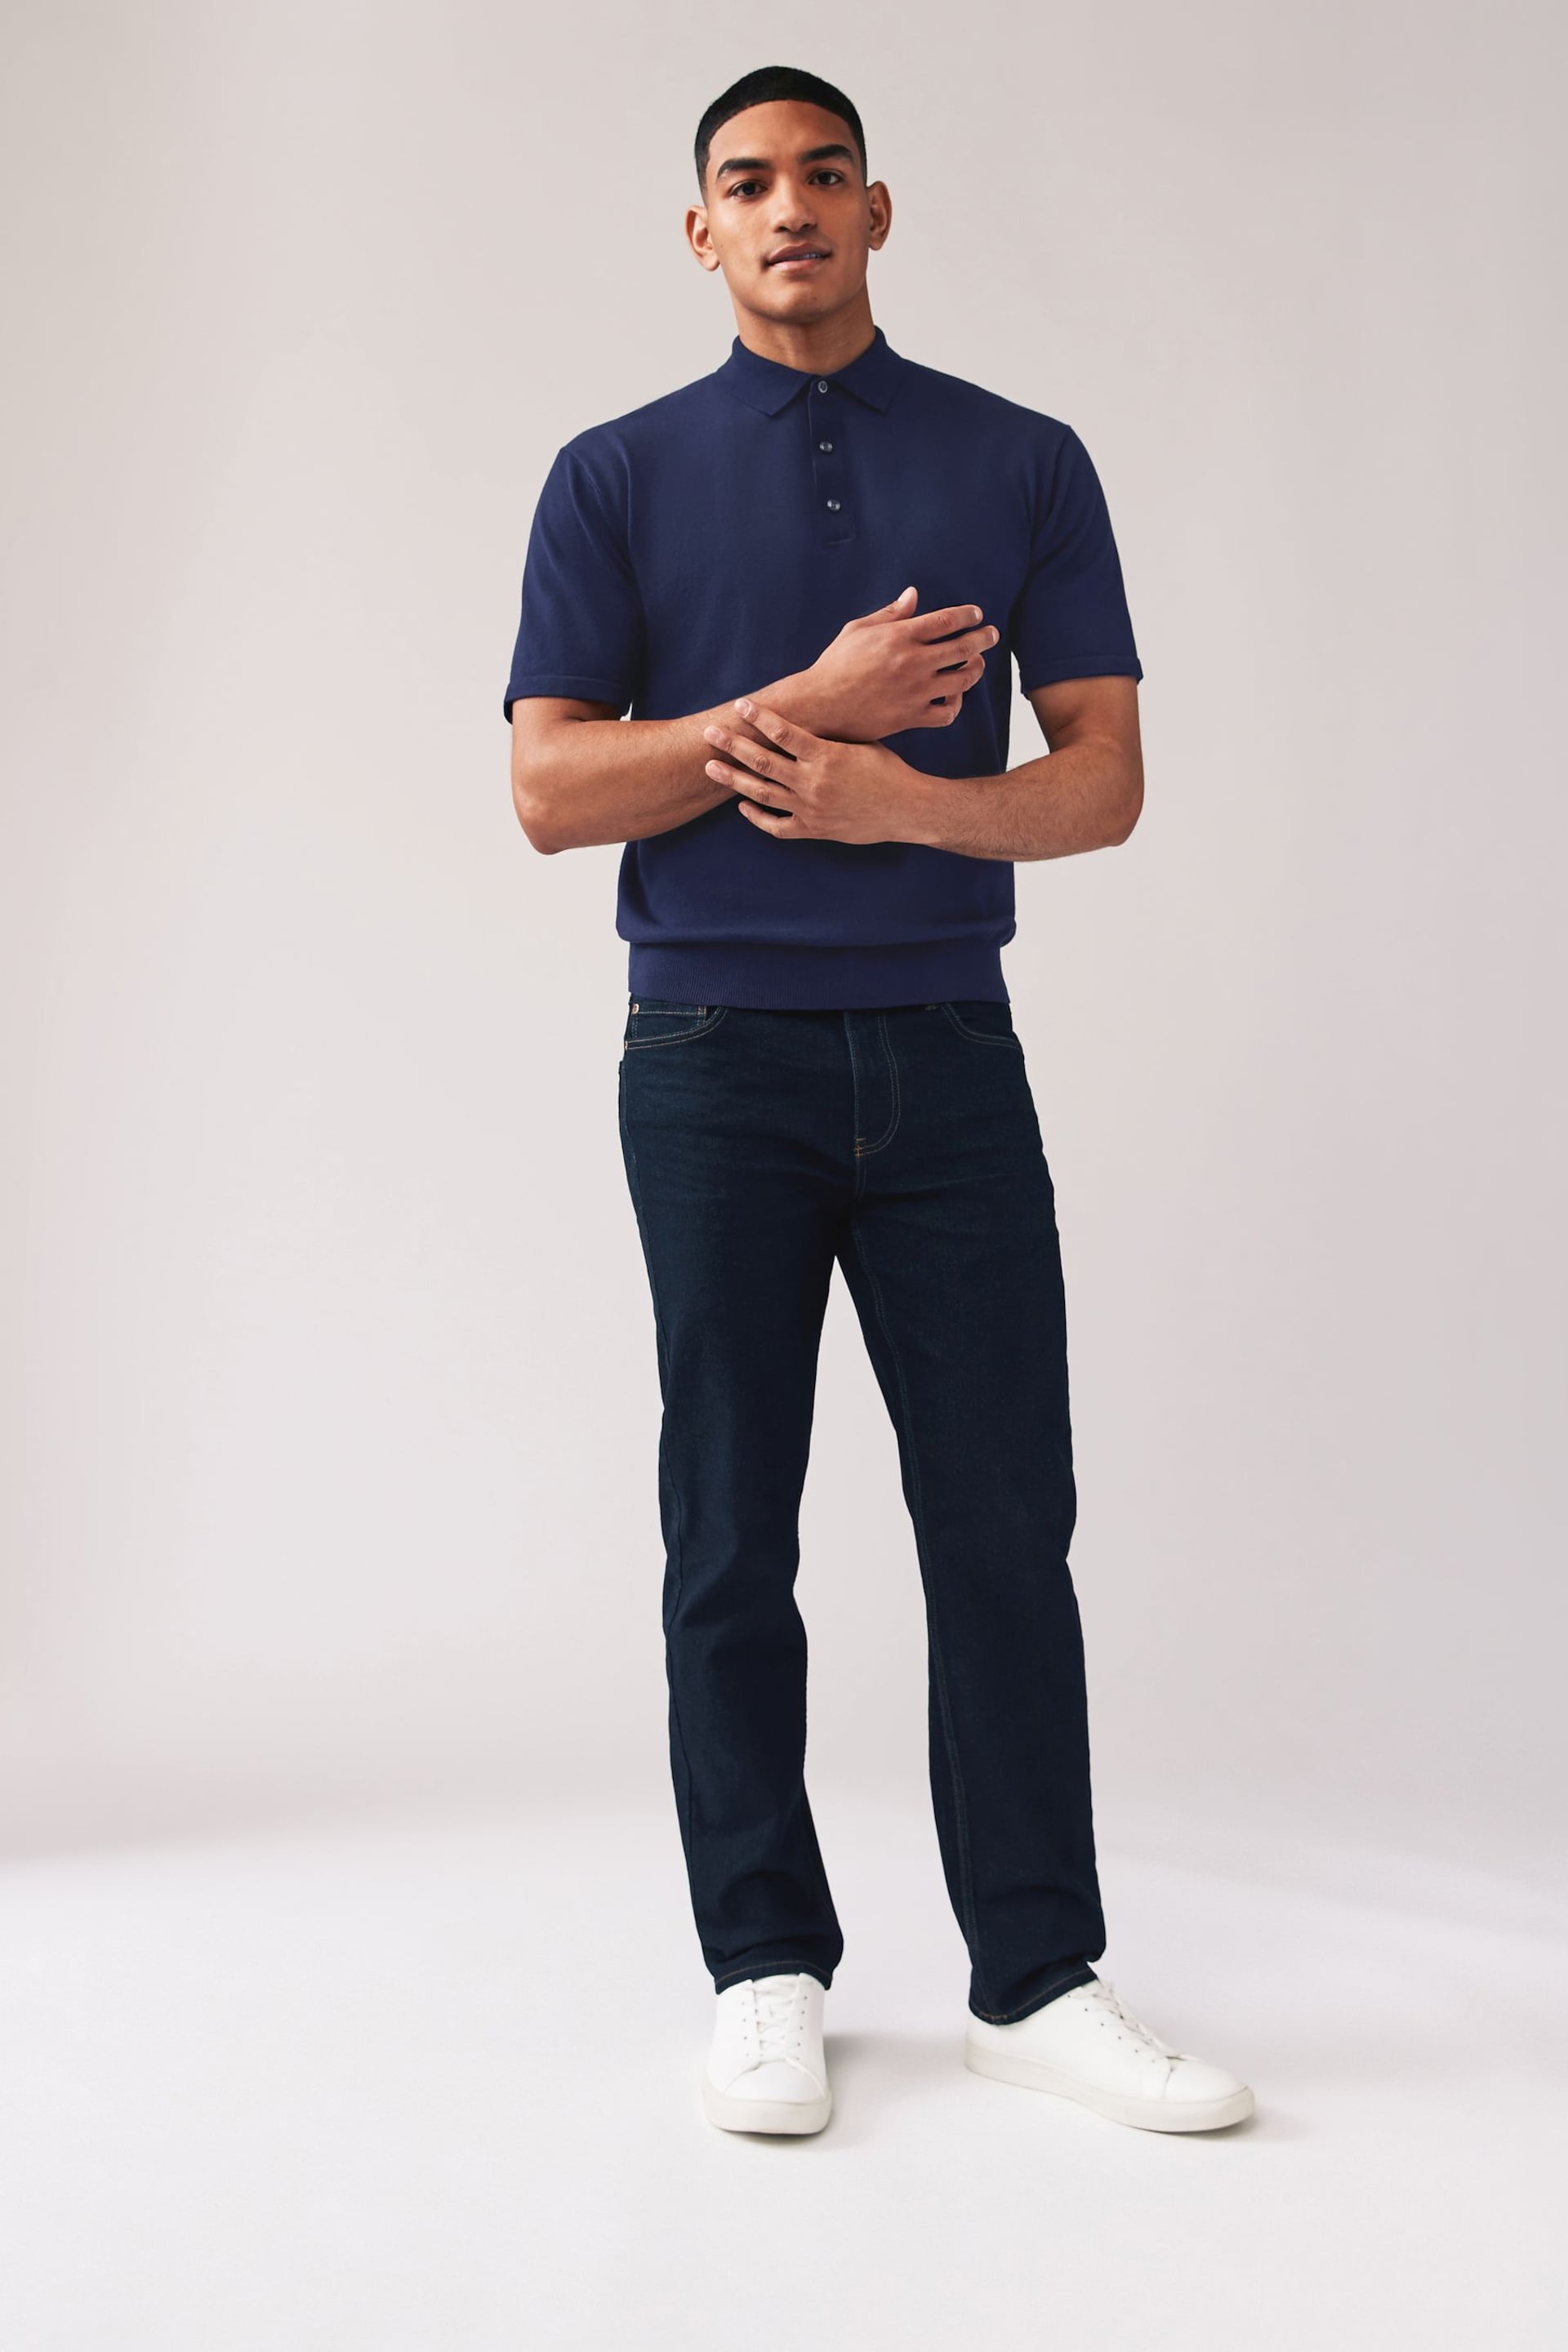 Black/Navy Knitted Regular Fit 2 Pack Polo Shirts - Image 6 of 13